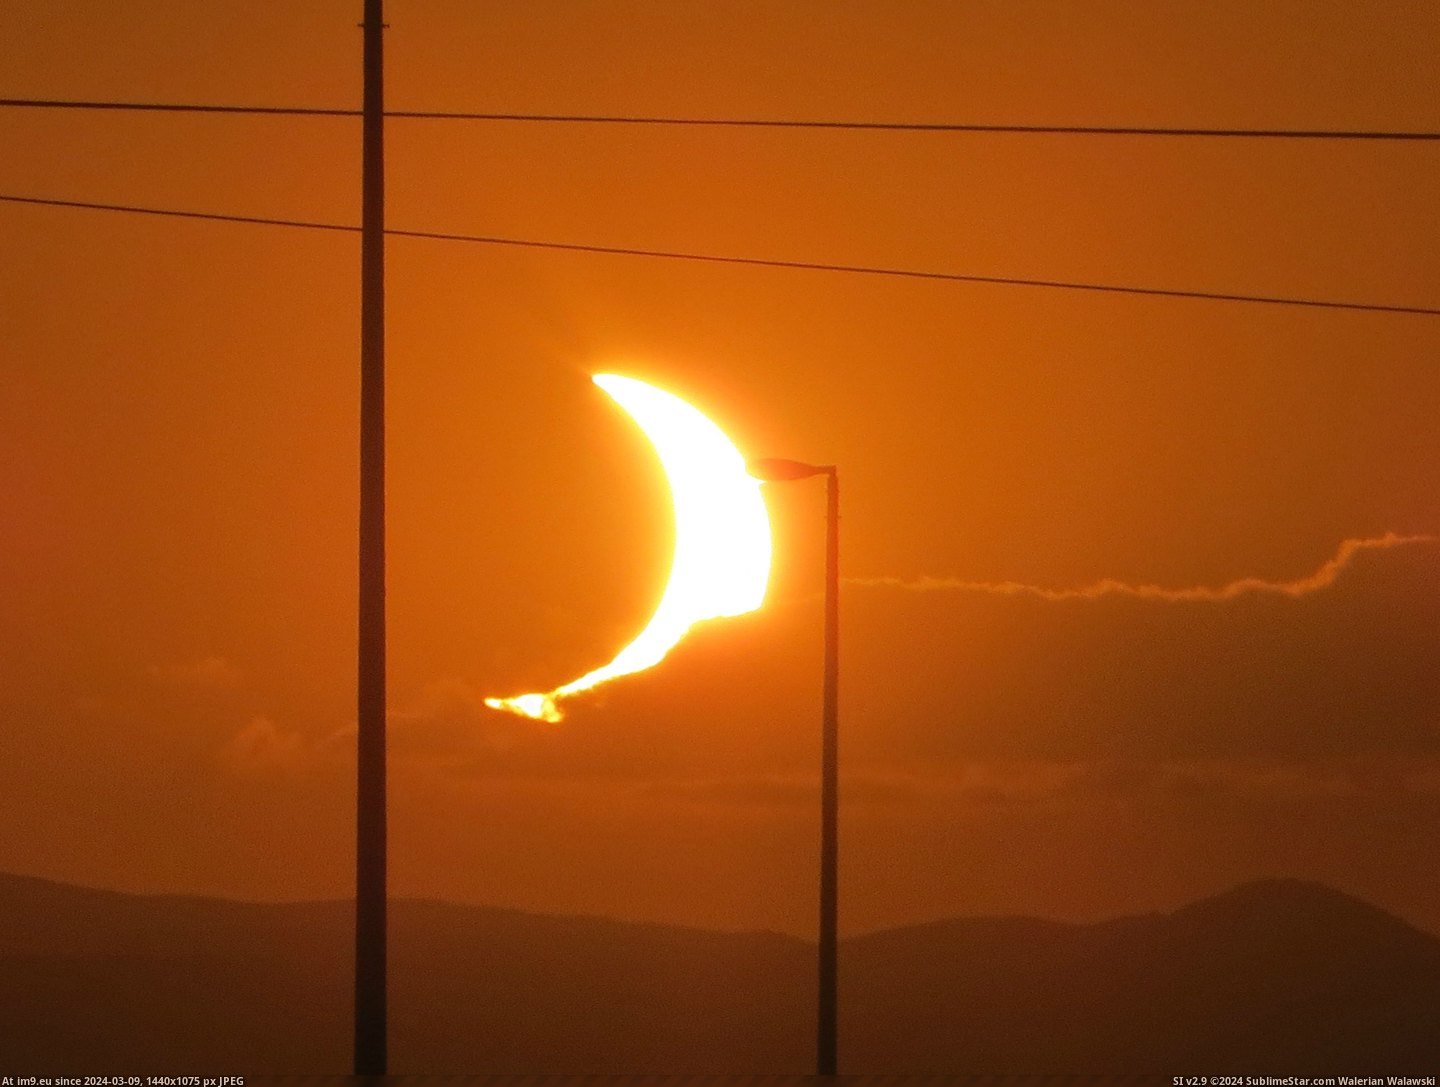 #Africa #Djibouti #Eclipse [Pics] Today's eclipse as seen from Djibouti, Africa. Pic. (Image of album My r/PICS favs))